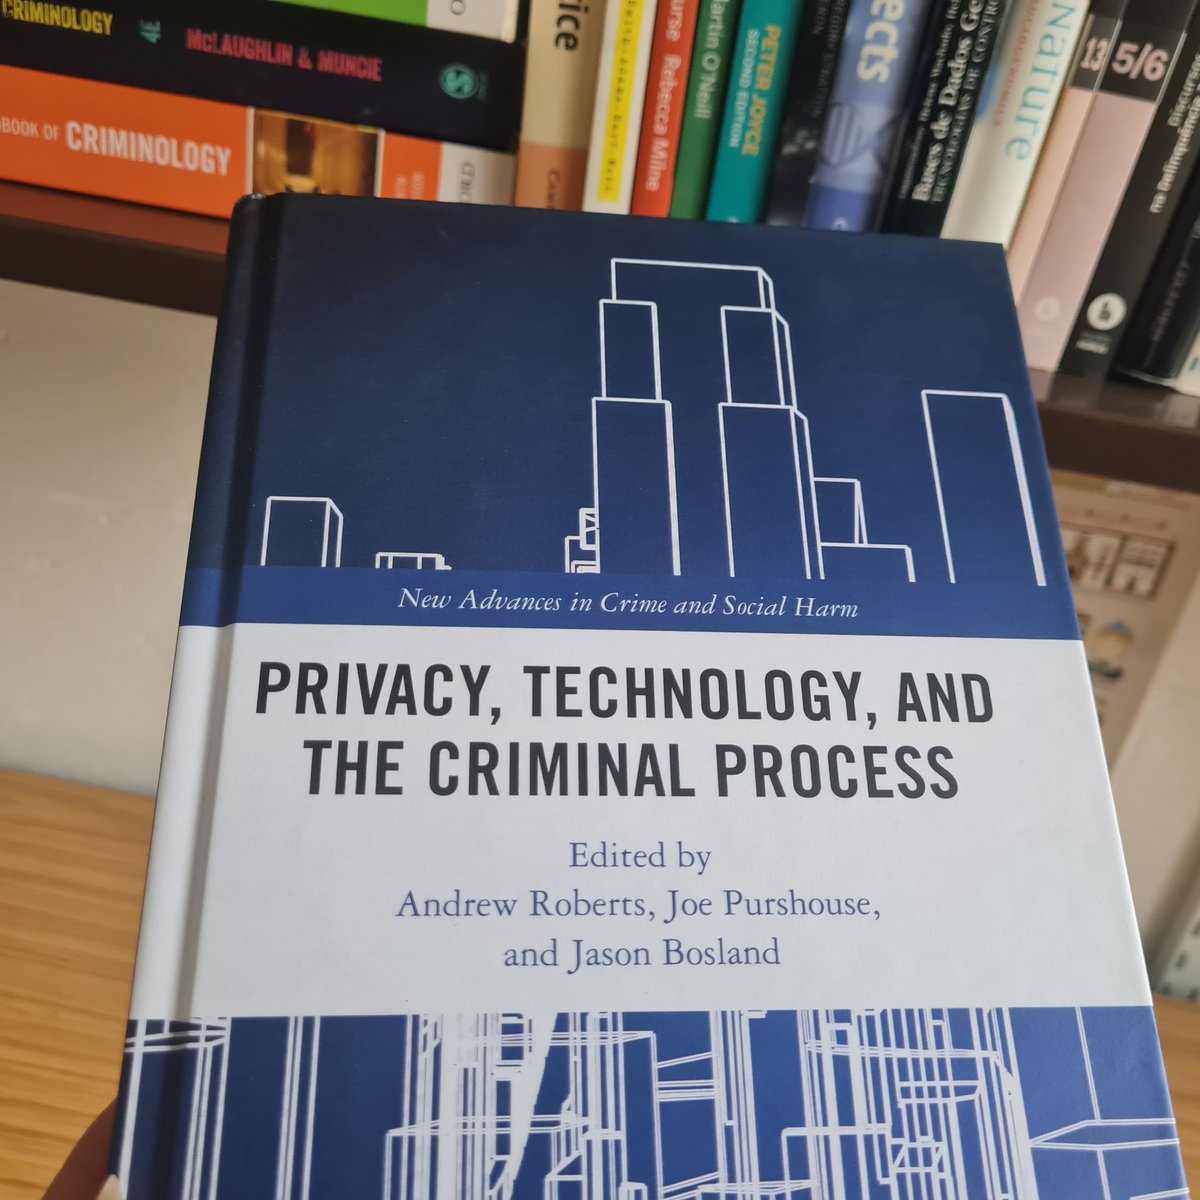 Exciting to get this hard copy of 'Privacy, Technology and the Criminal Process' and v glad to see my chapter on Frontline Perceptions of #bodyworncameras in a book made up of great contributions and authors - well done ed team & thank you @joepurshouse